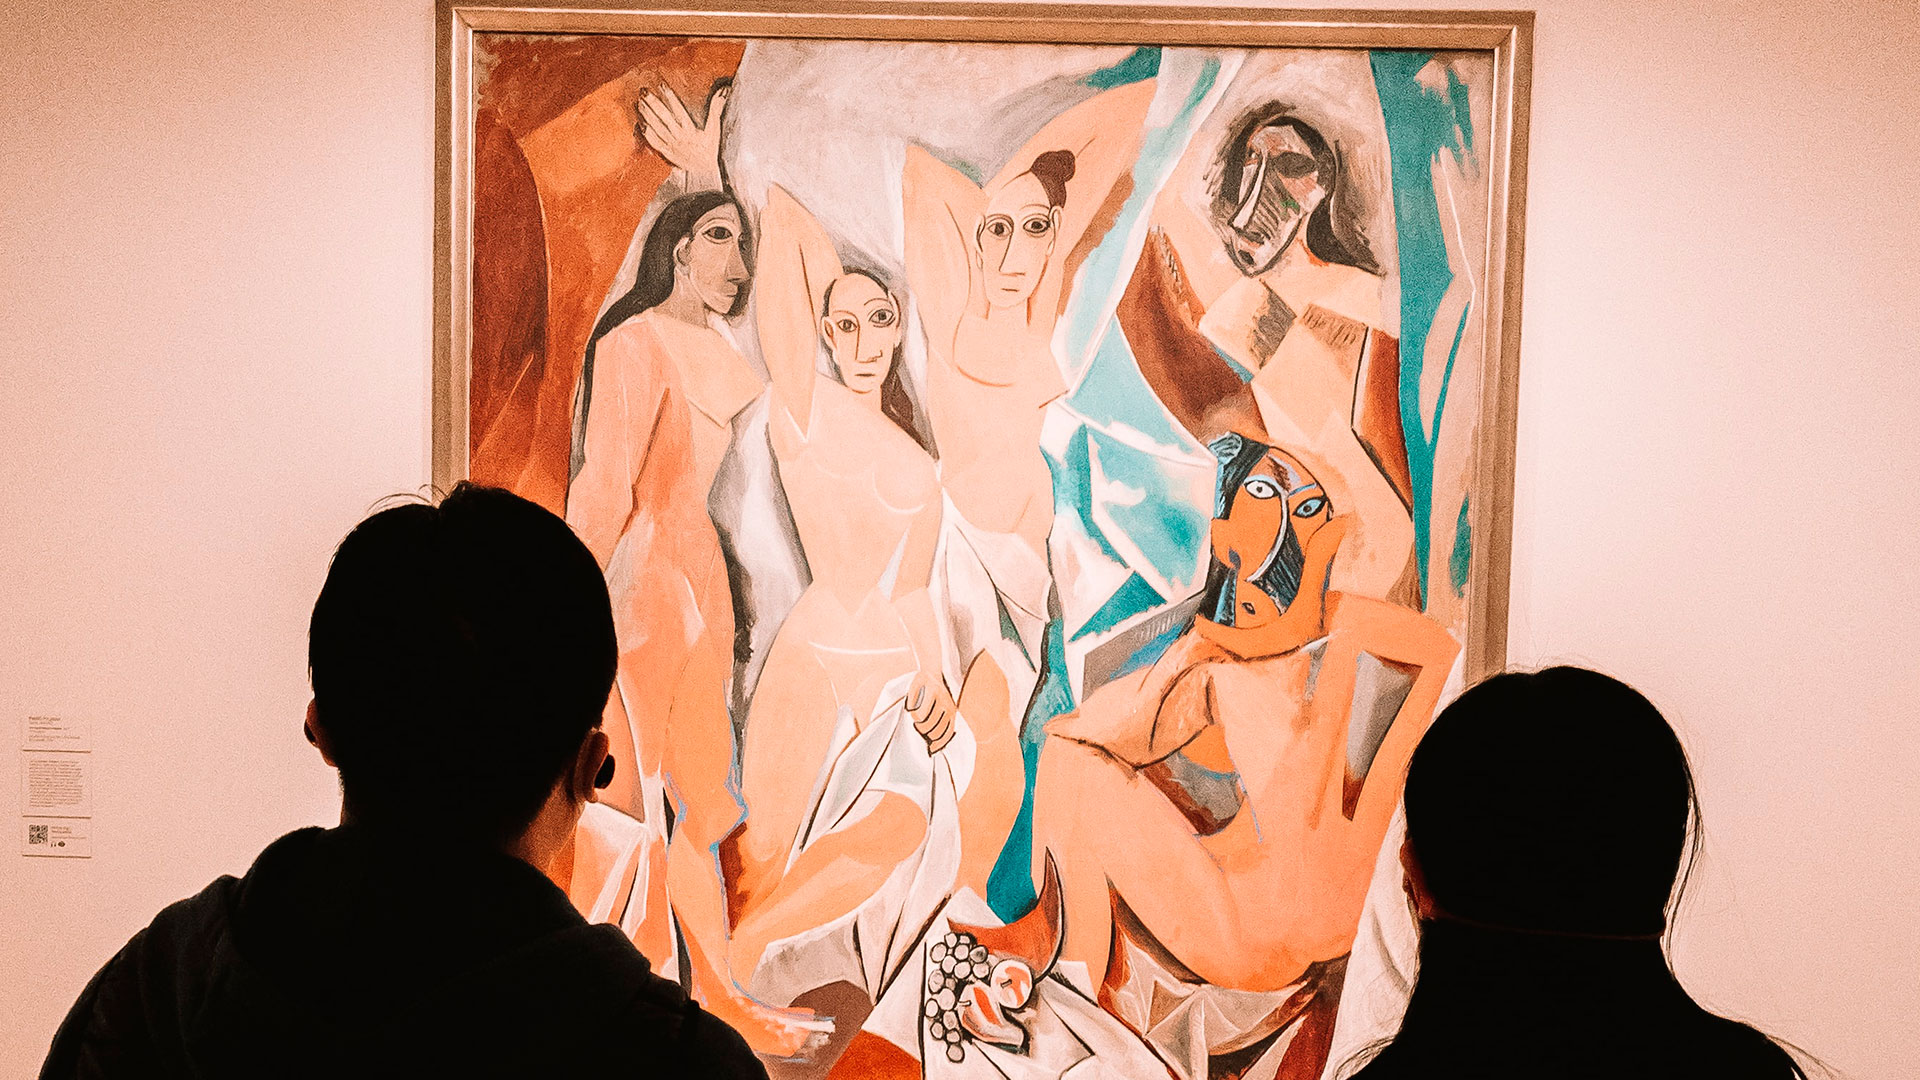 picasso-louvre-02-1920x1080